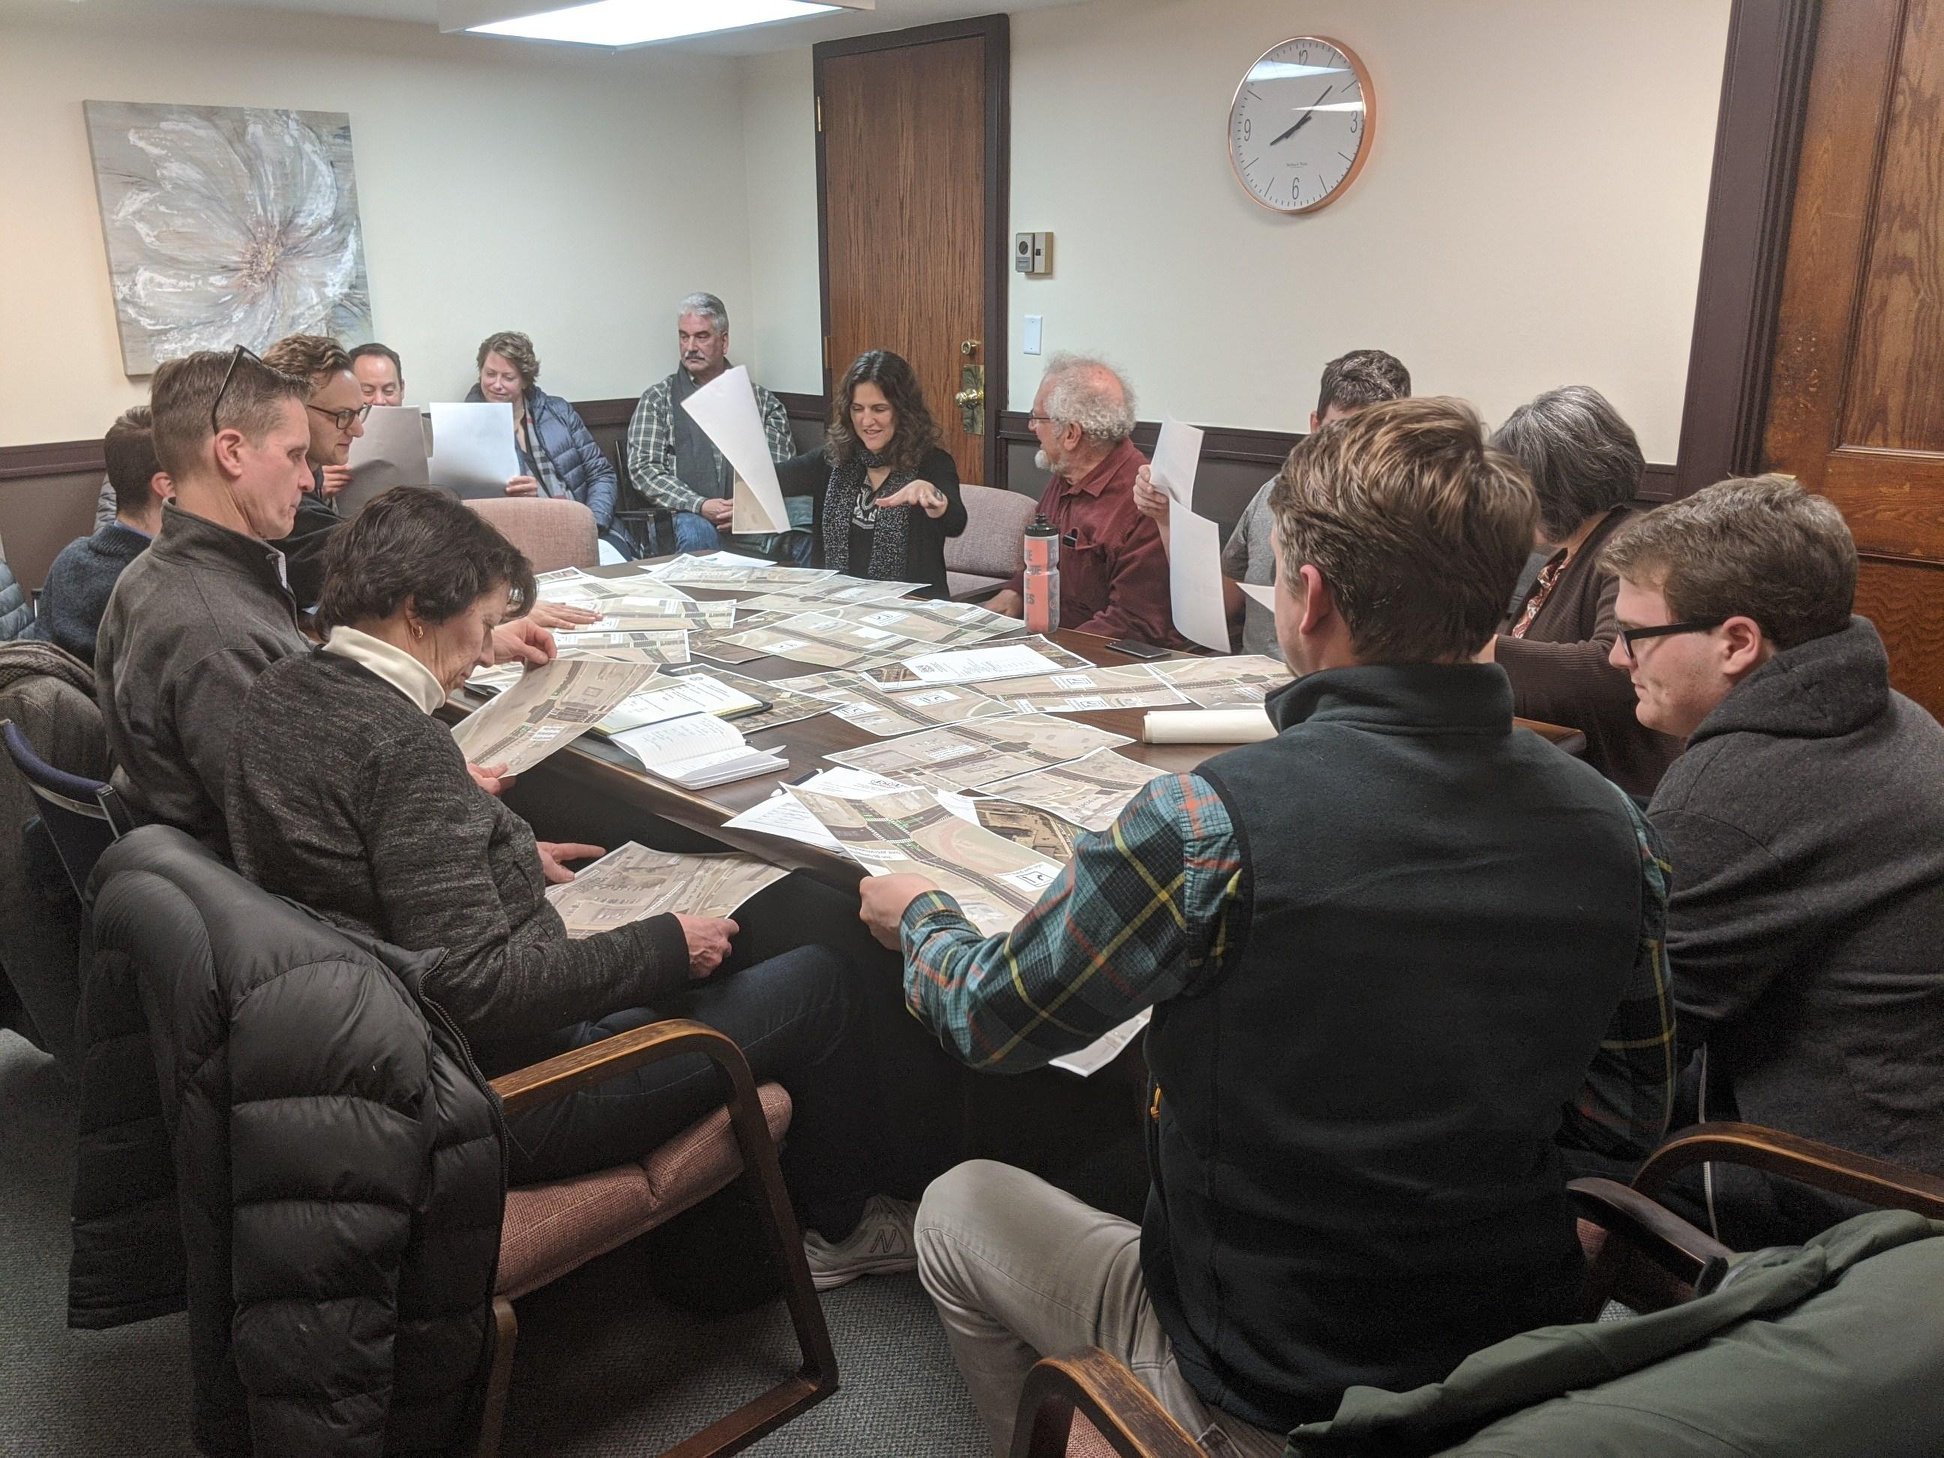 A group of members at one of our monthly meetings, discussing ideas for street layout designs.